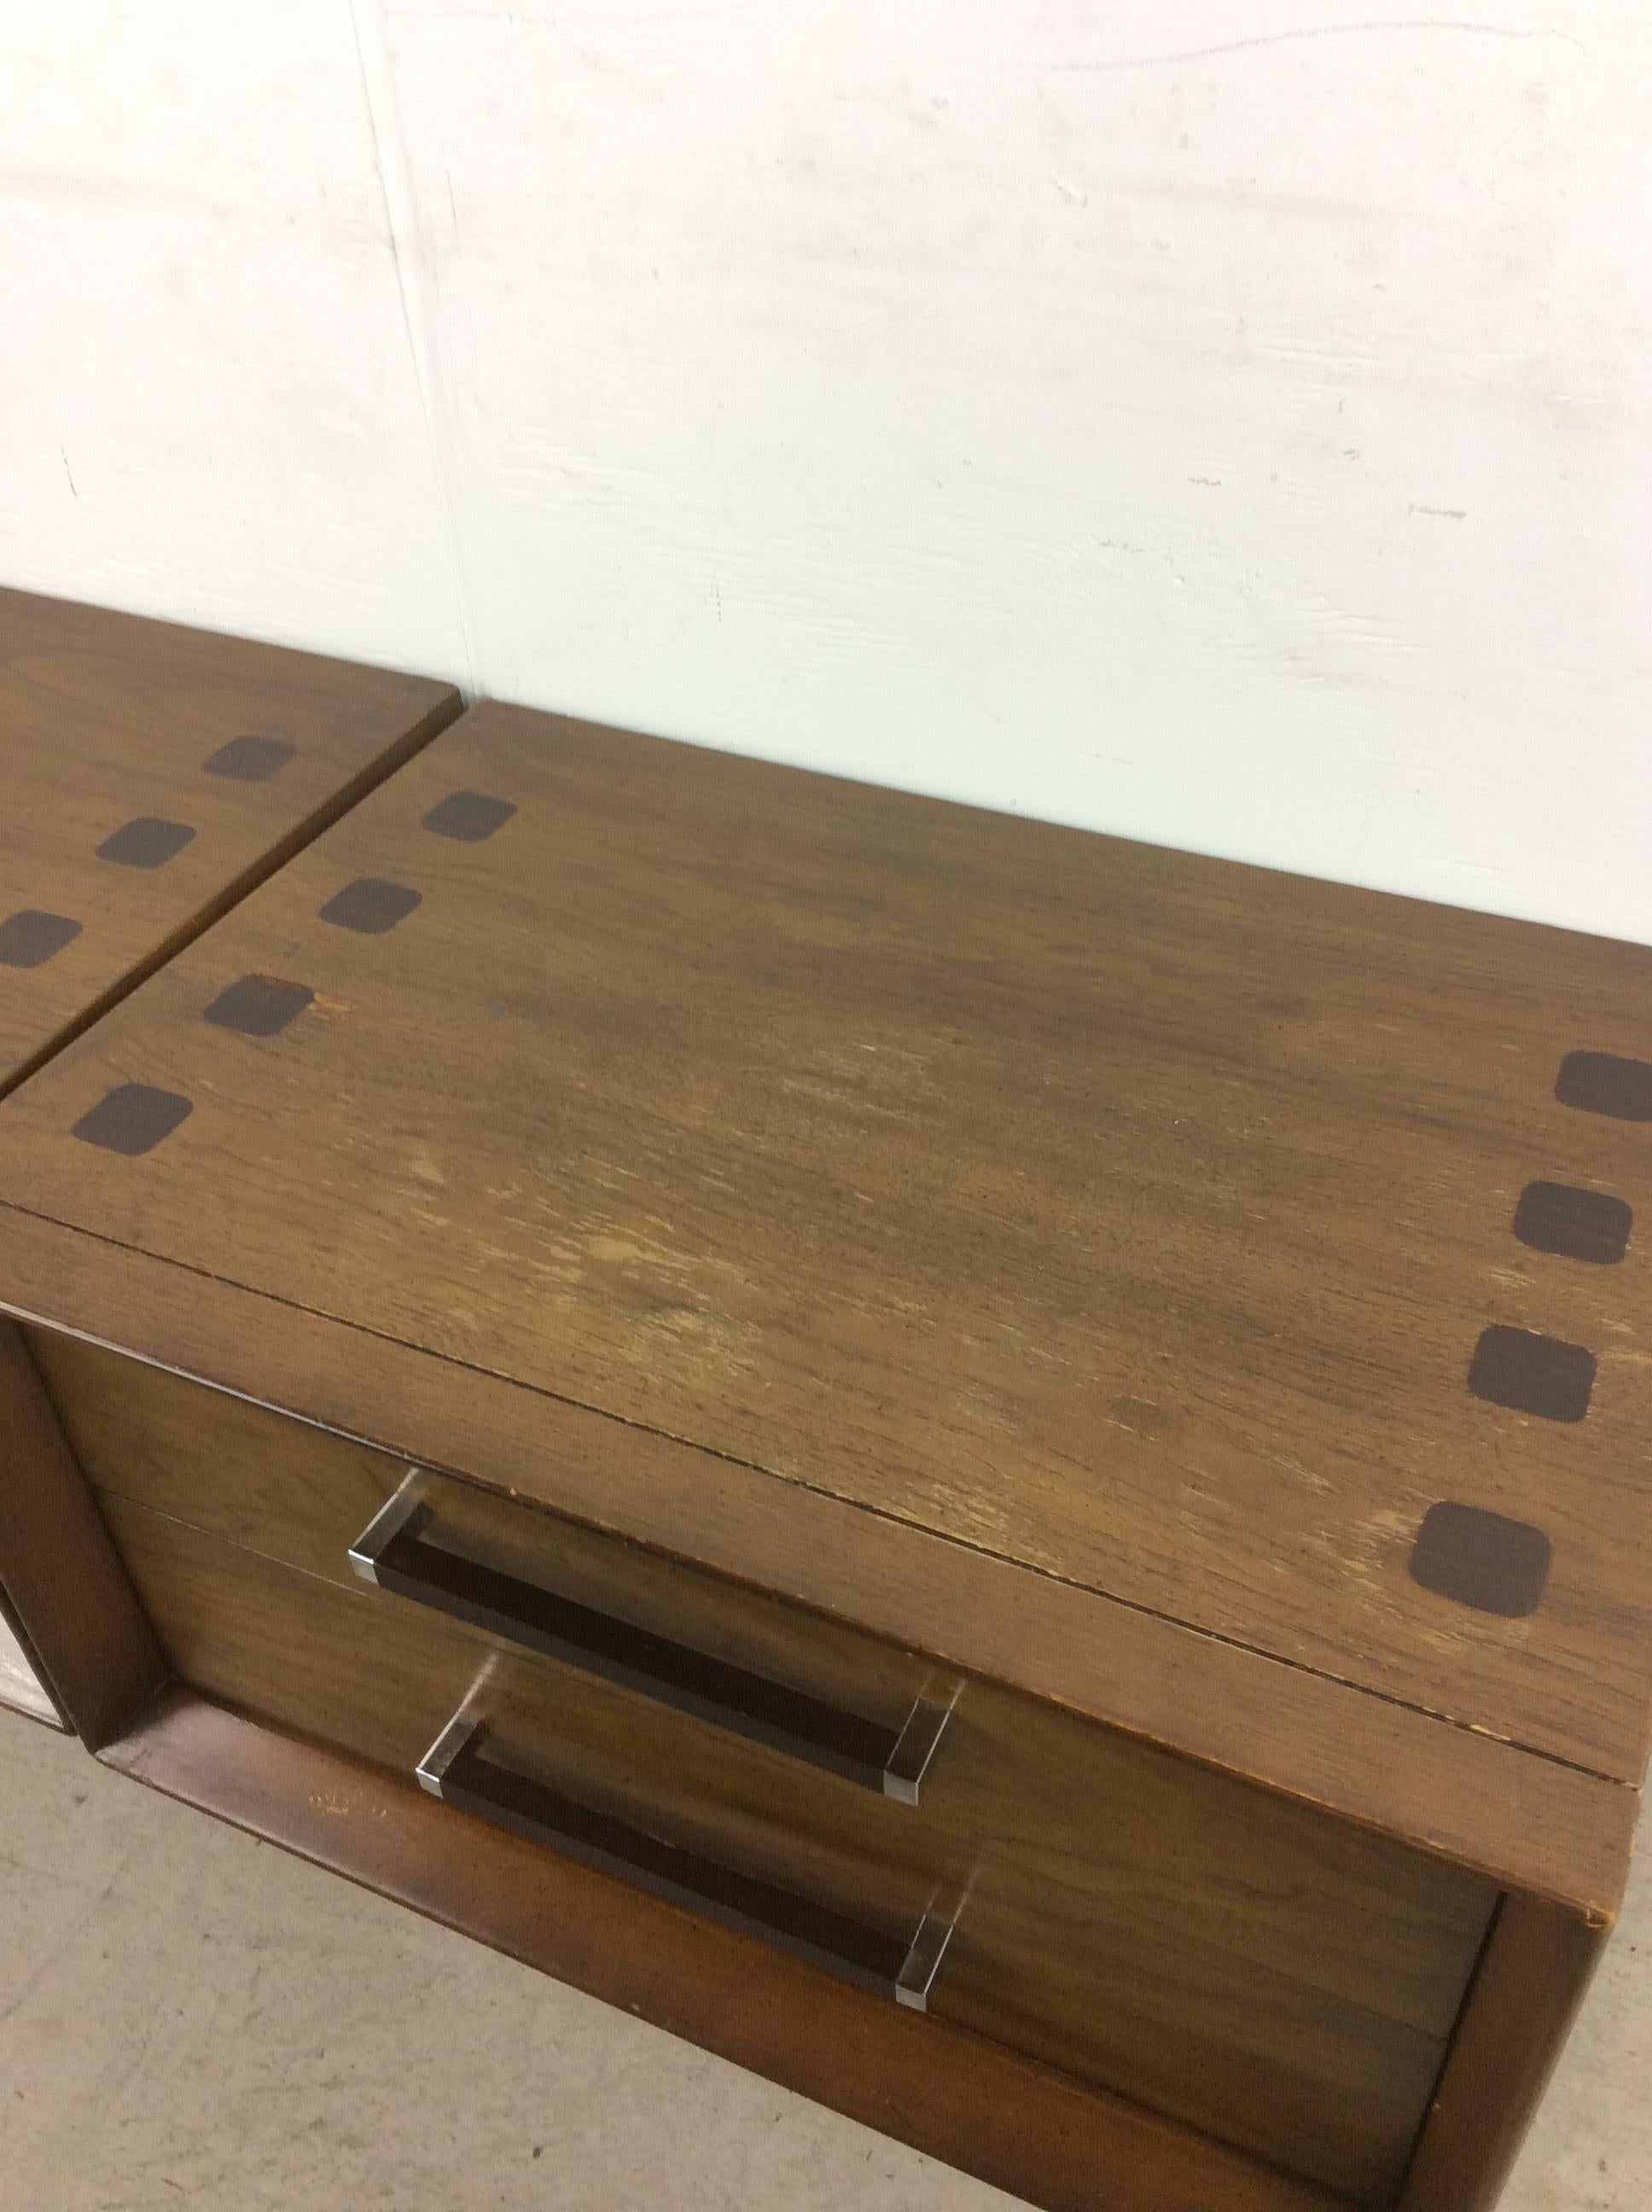 This pair of mid century modern nightstands from the Tower Suite by Lane Furniture feature hardwood construction, walnut veneer with original finish, rosewood drawer pulls with chrome accents, and black painted base.

Dimensions: 26w 18d 20.25h


